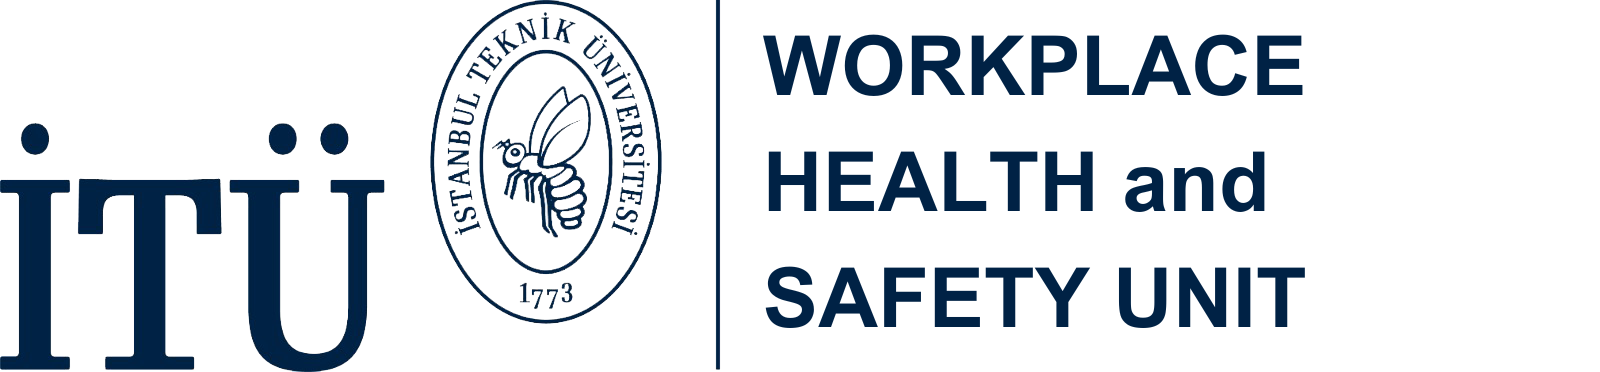 ITU WORKPLACE HEALTH AND SAFETY UNIT